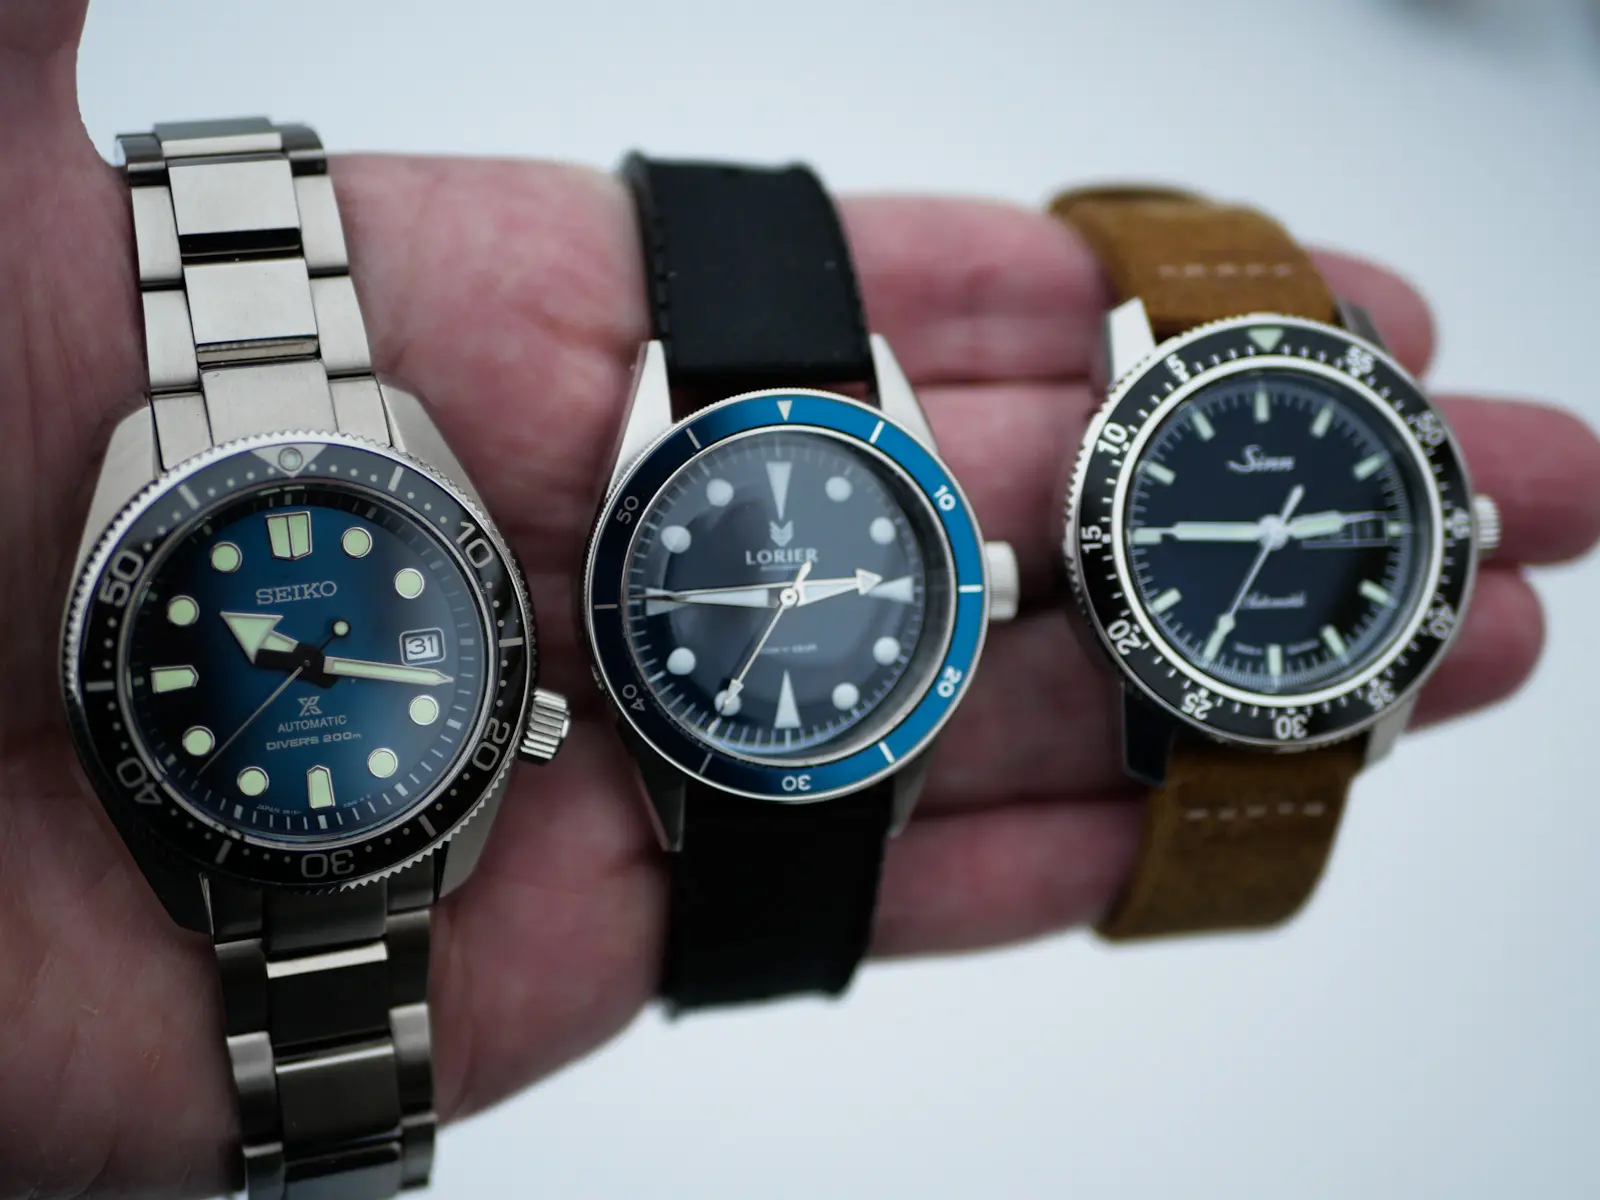 The watches I wore the most in 2020: The Seiko Prospex SPB083J1, Sinn 104  and Lorier